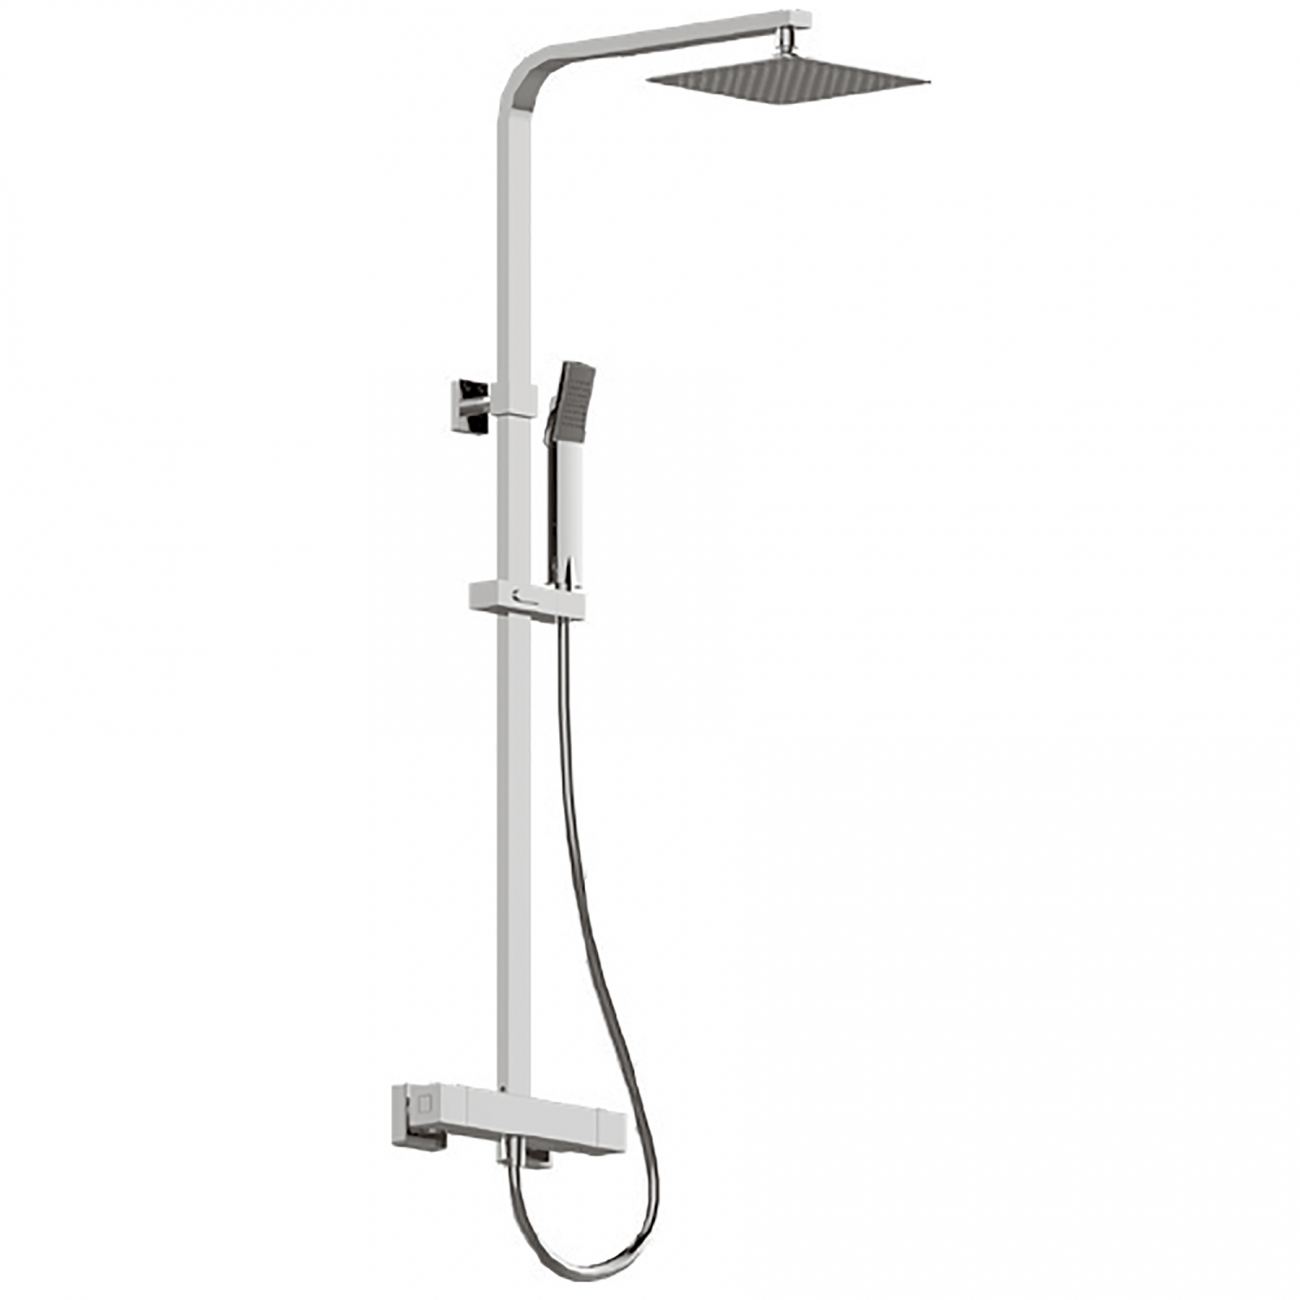 Graff Incanto wall mounted thermostatic shower column